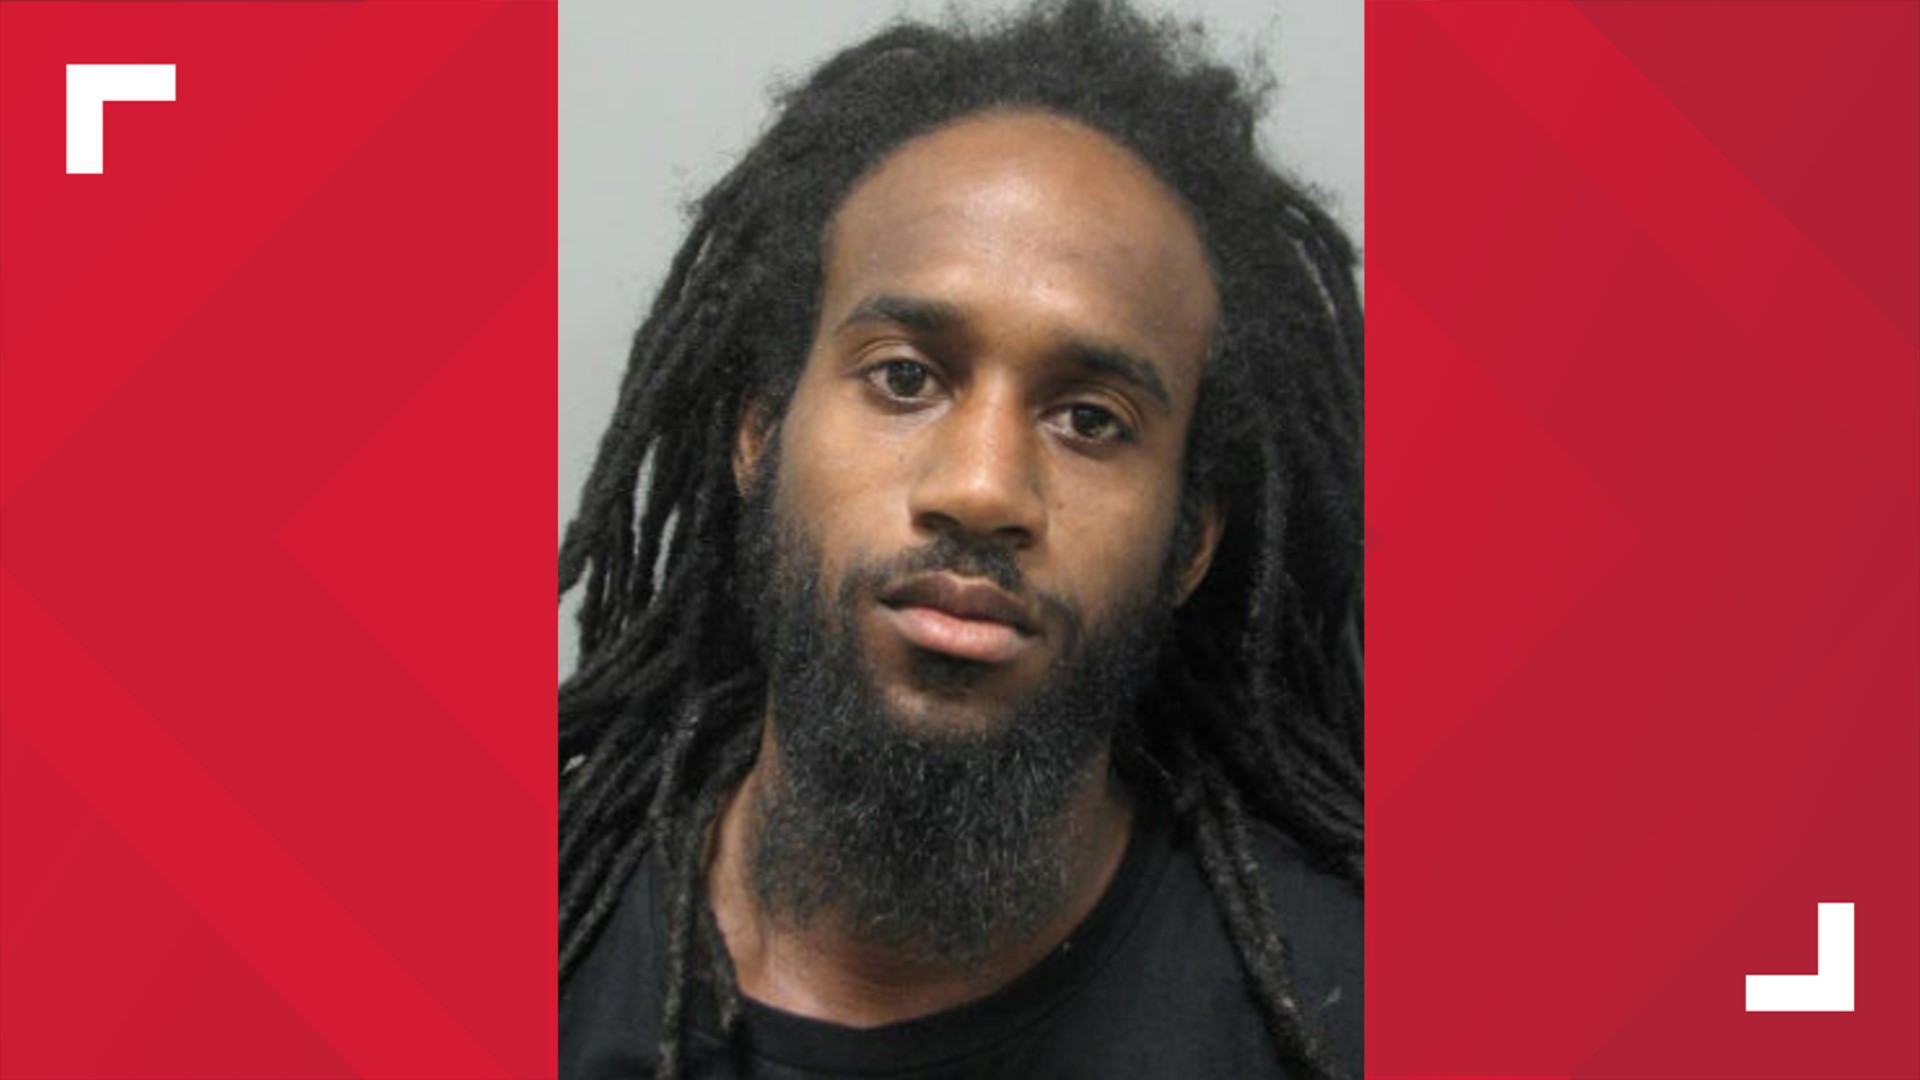 Prince George's County Police and the U.S. Marshals Capital Area Regional Fugitive Task Force are searching for 33-year-old Stephon Edward Jones.